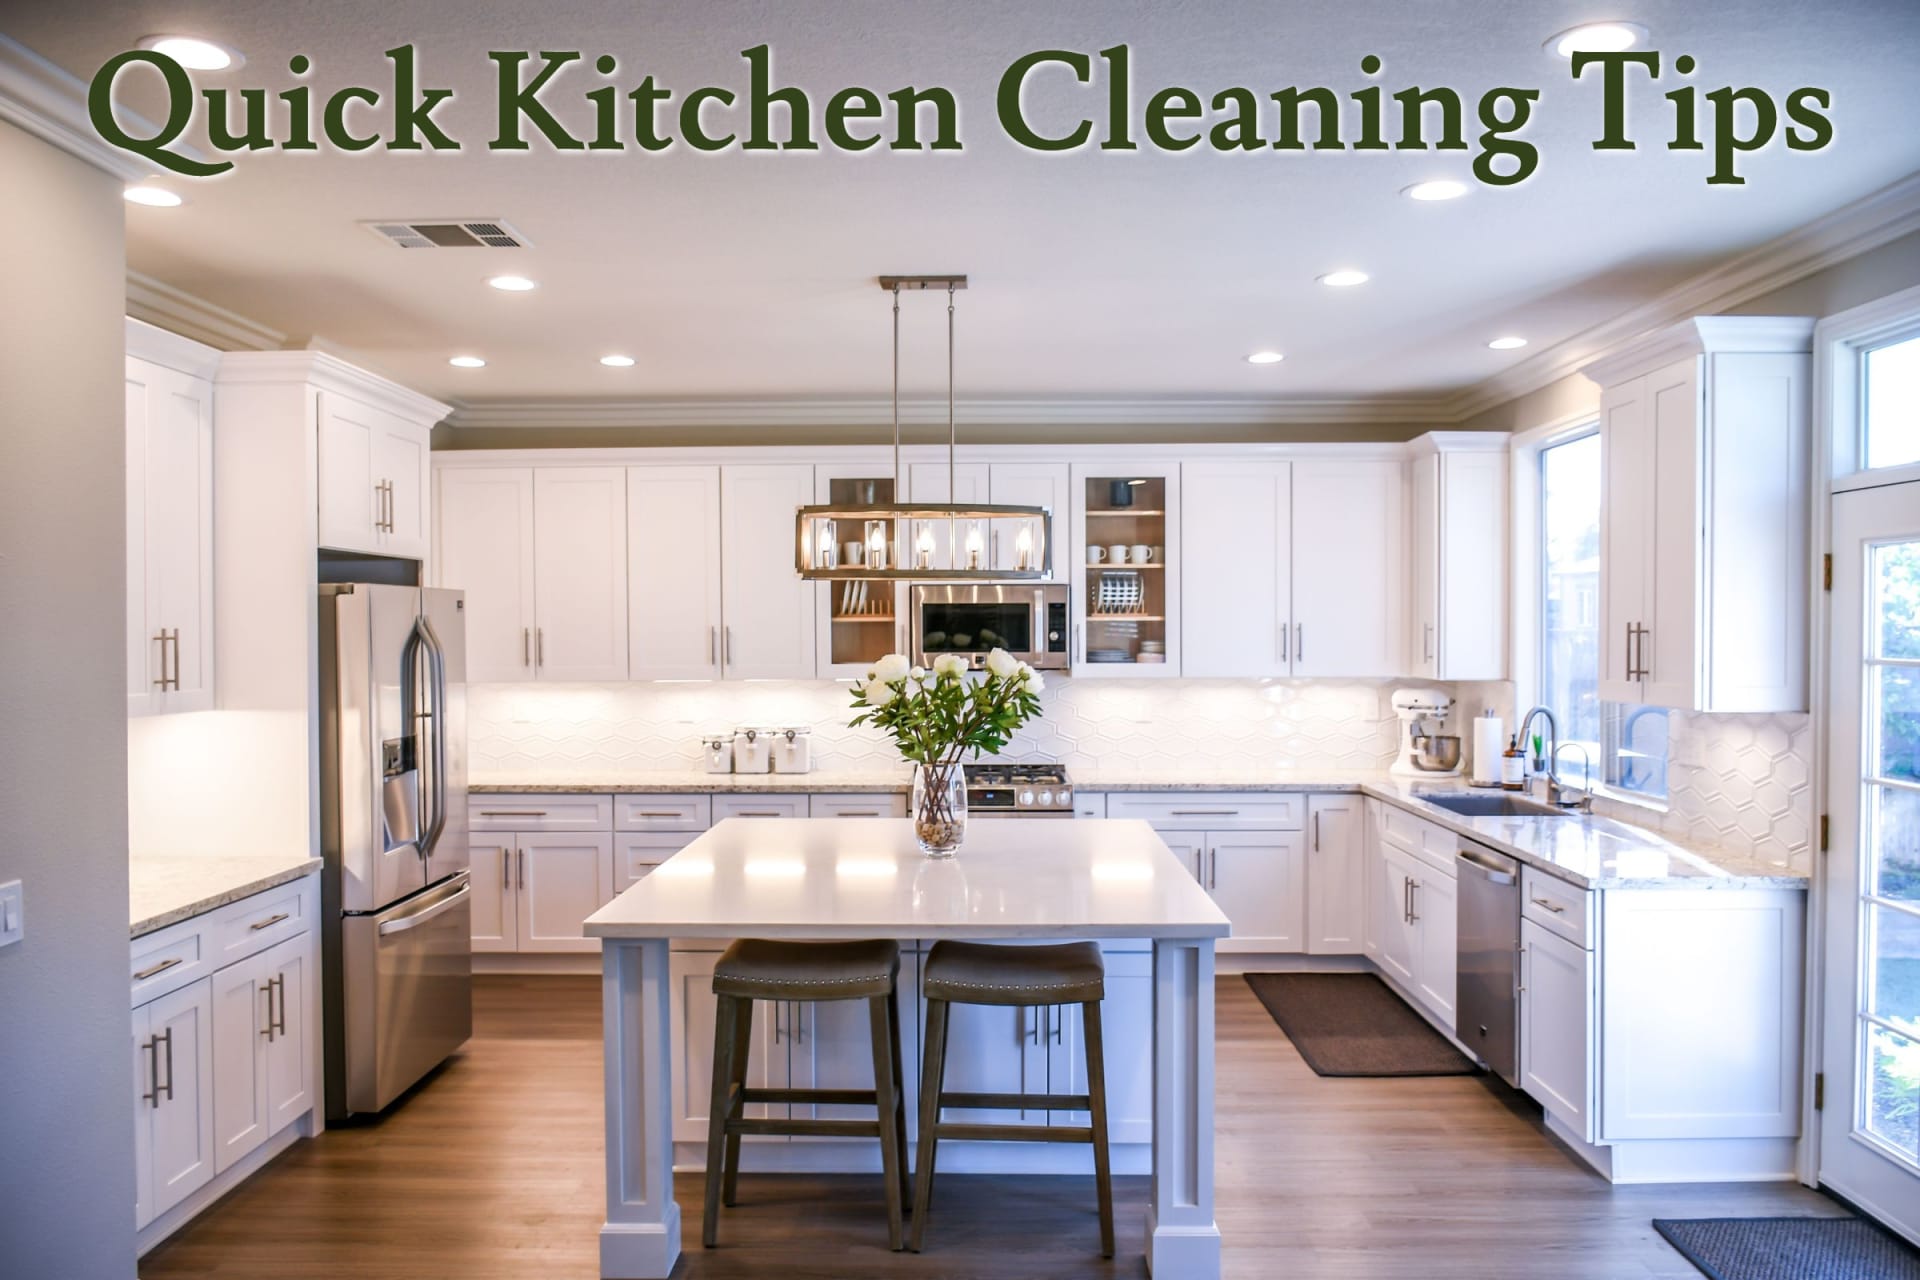 Kitchen Cleaning Tips from a Weekly Cleaning Service